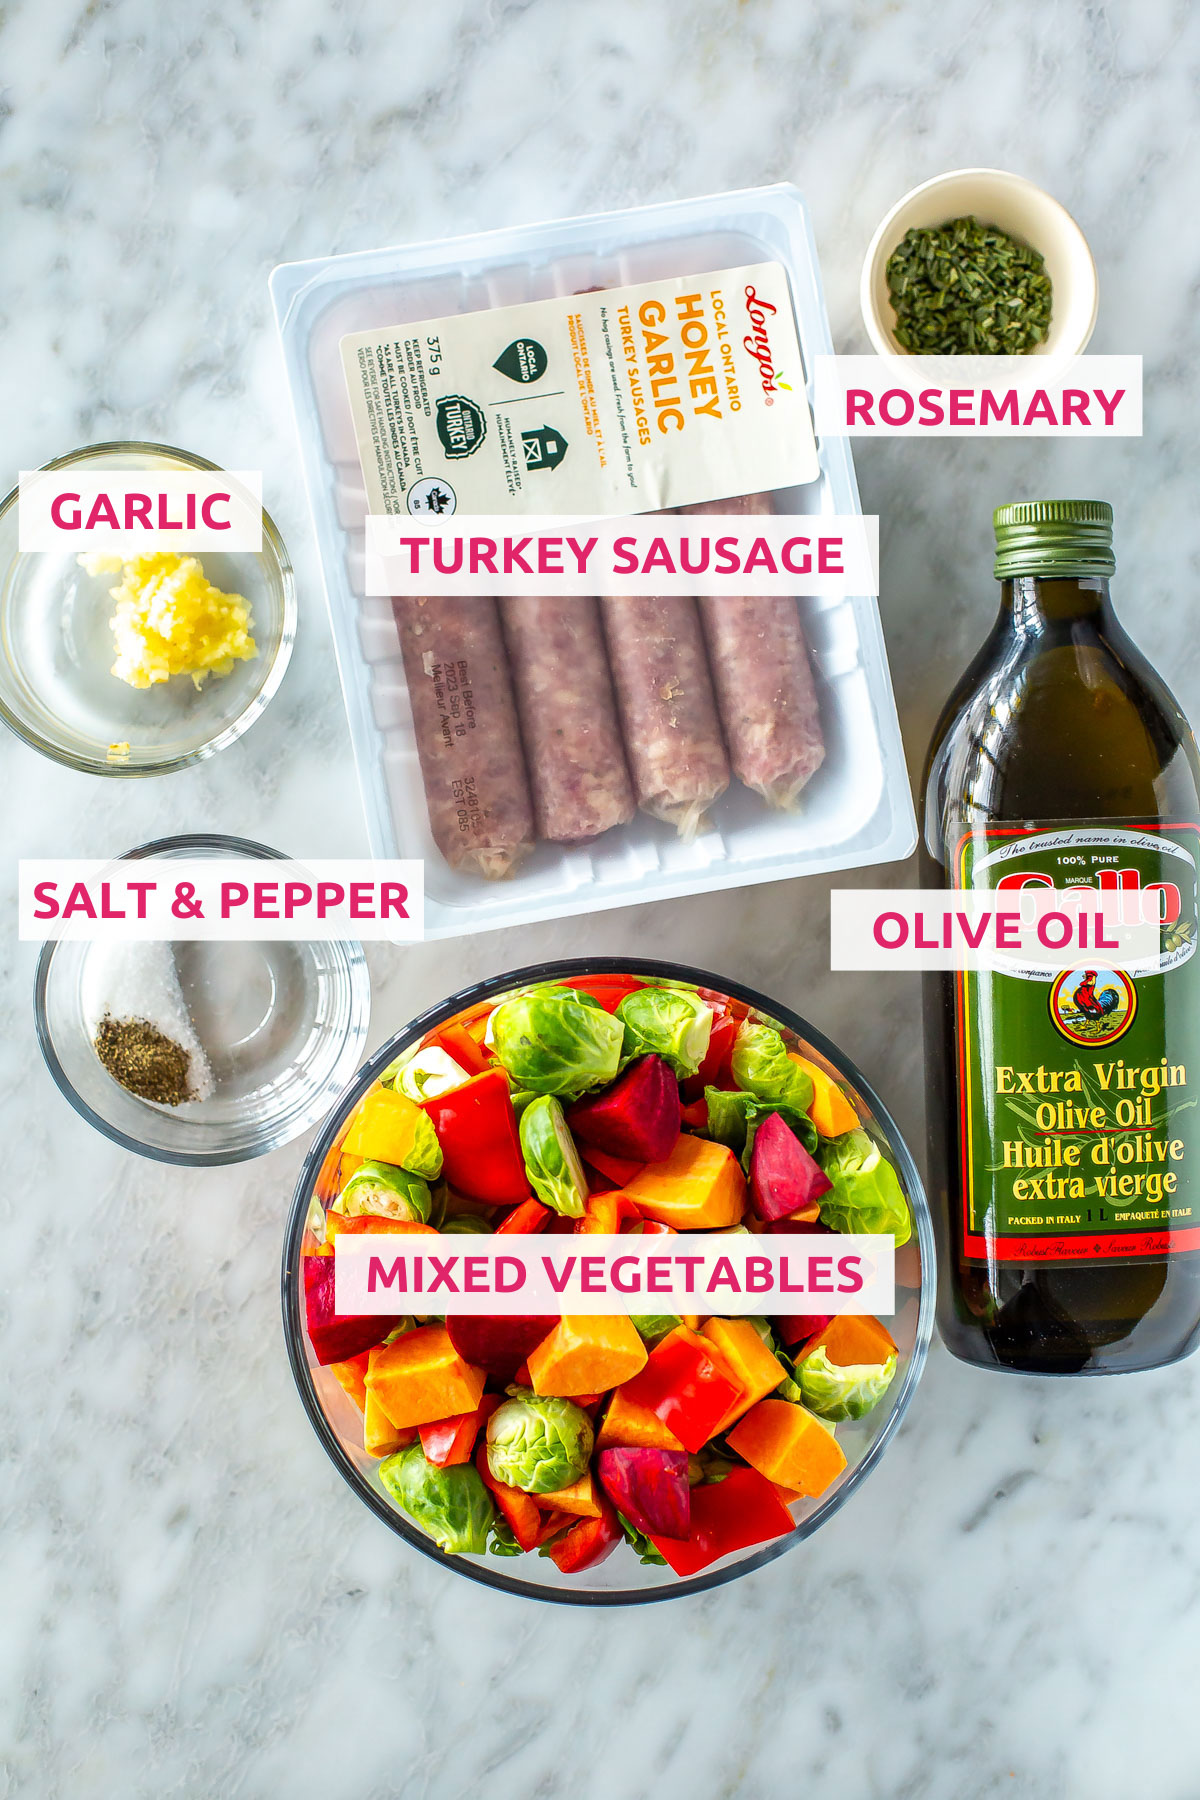 Ingredients for sheet pan sausage and vegetables: mixed vegetables, turkey sausage, olive oil, rosemary, garlic, salt and pepper.